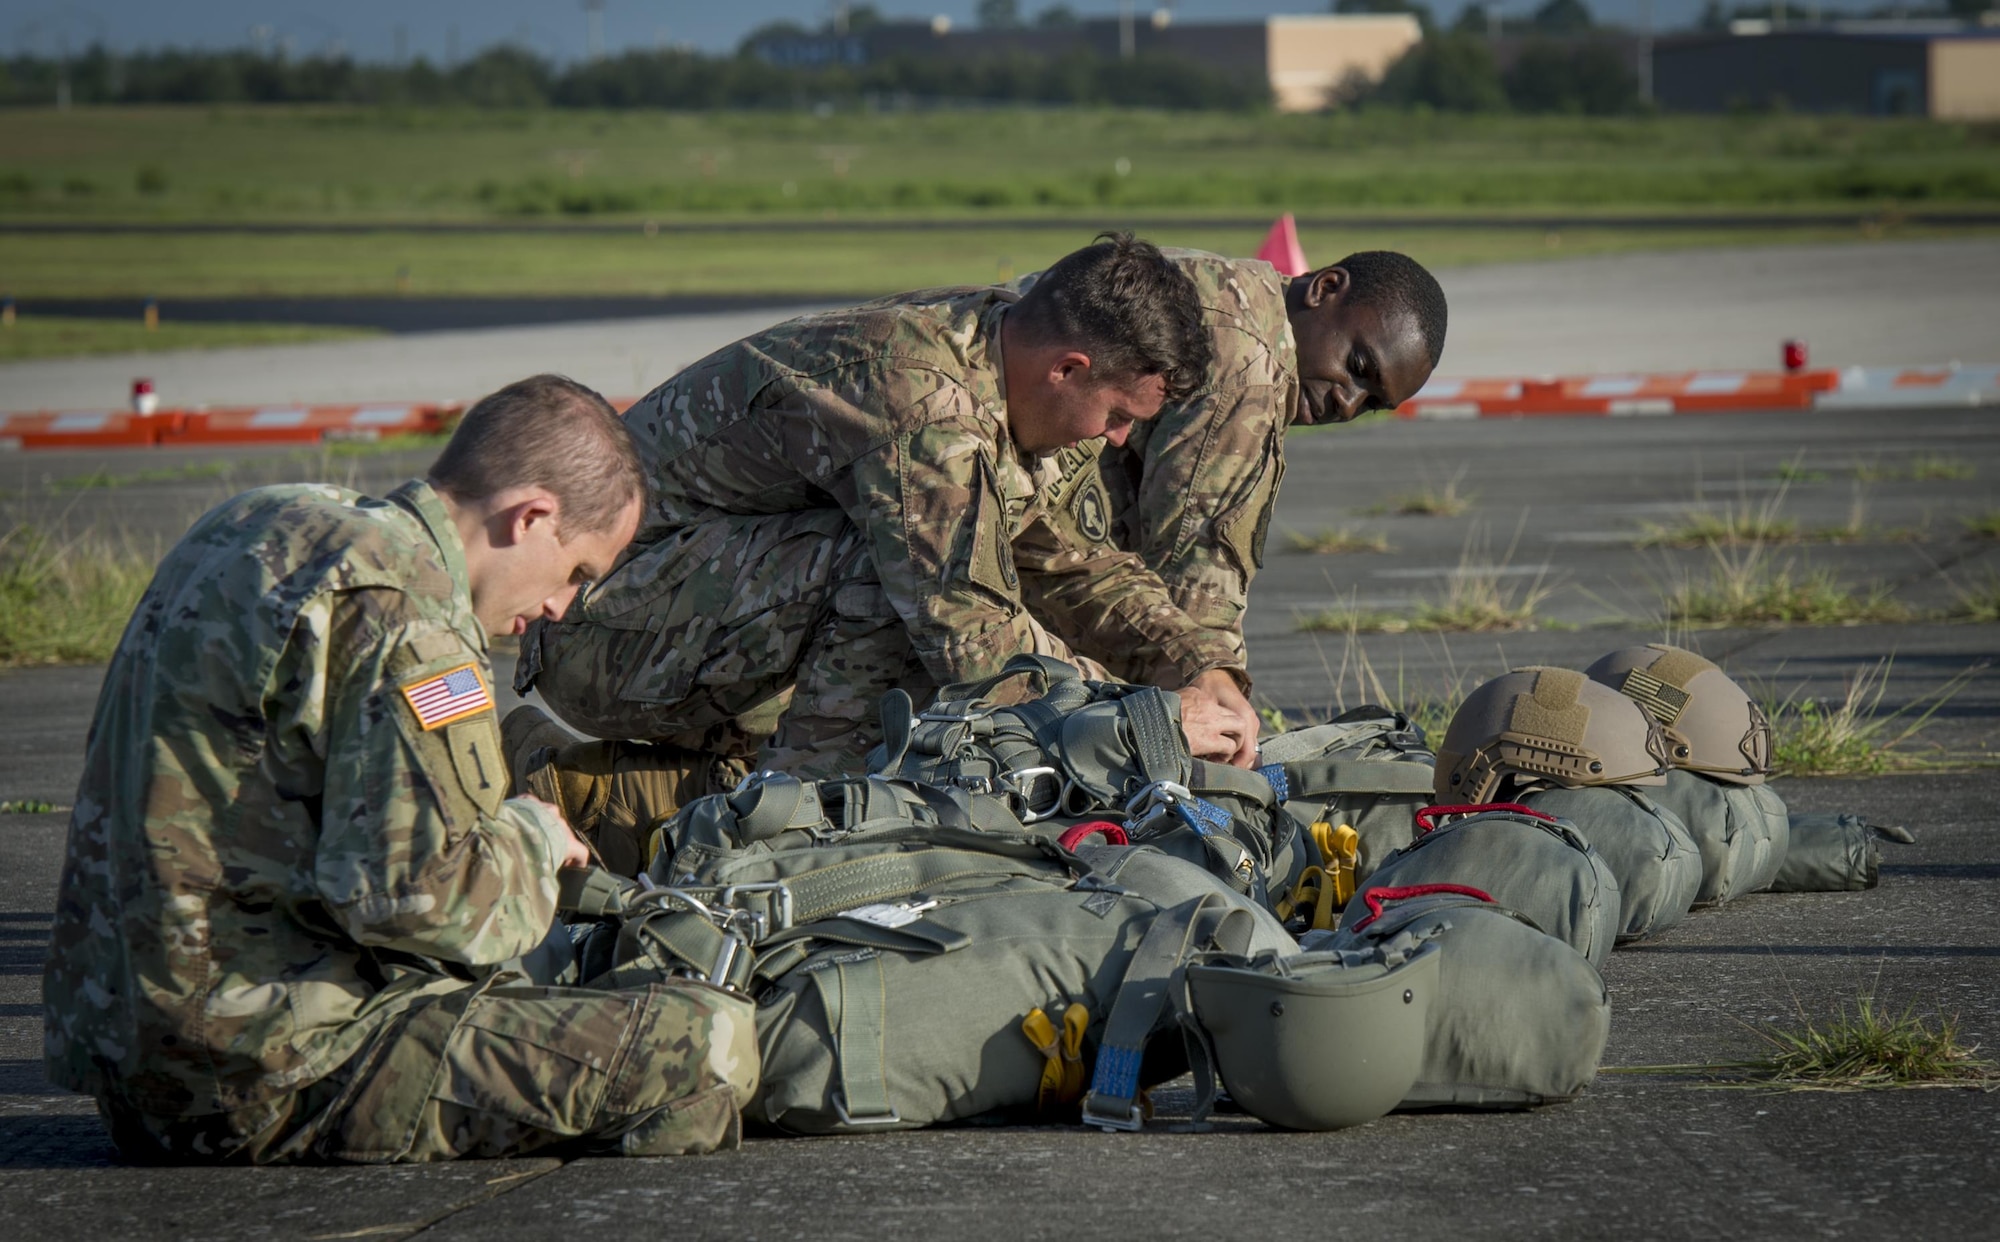 Service members from MacDill Air Force Base, Fla., prepare their gear before their flight in Brooksville, Fla., July 15, 2017. Service members must run through safety procedures and check parachutes before jumping. (U.S. Air Force photo by Senior Airmen Mariette Adams)